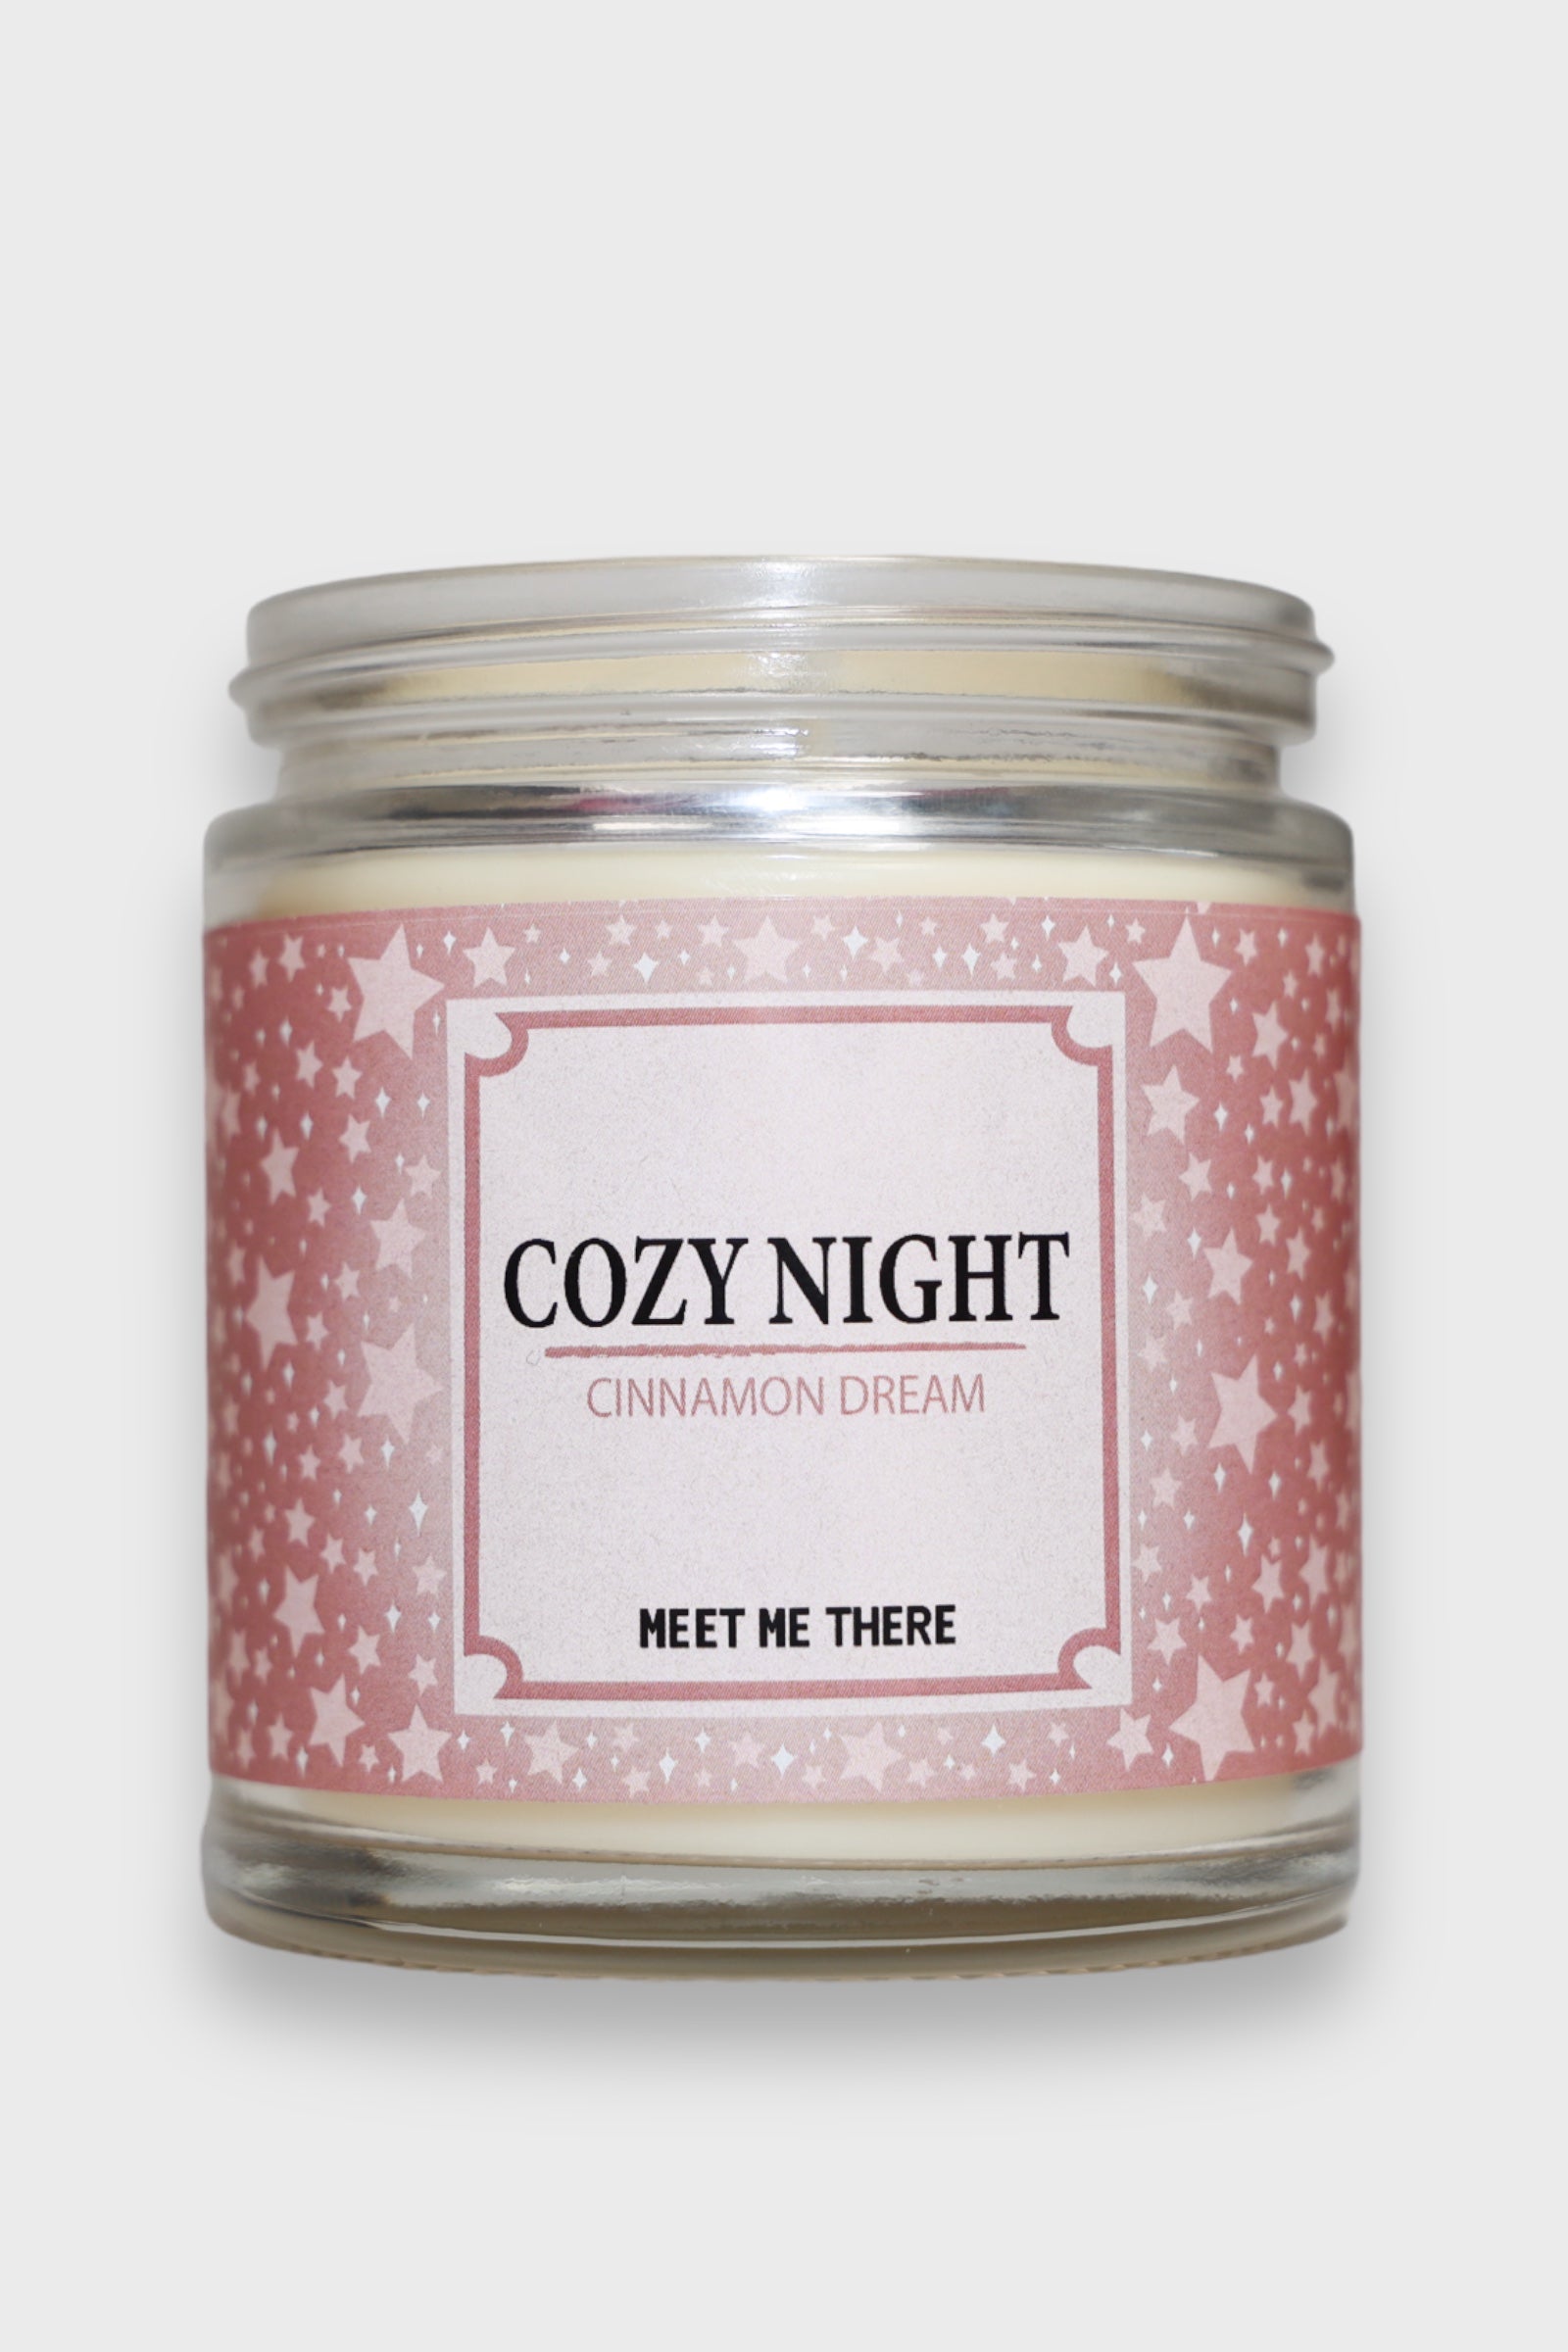 "Cozy night" candle